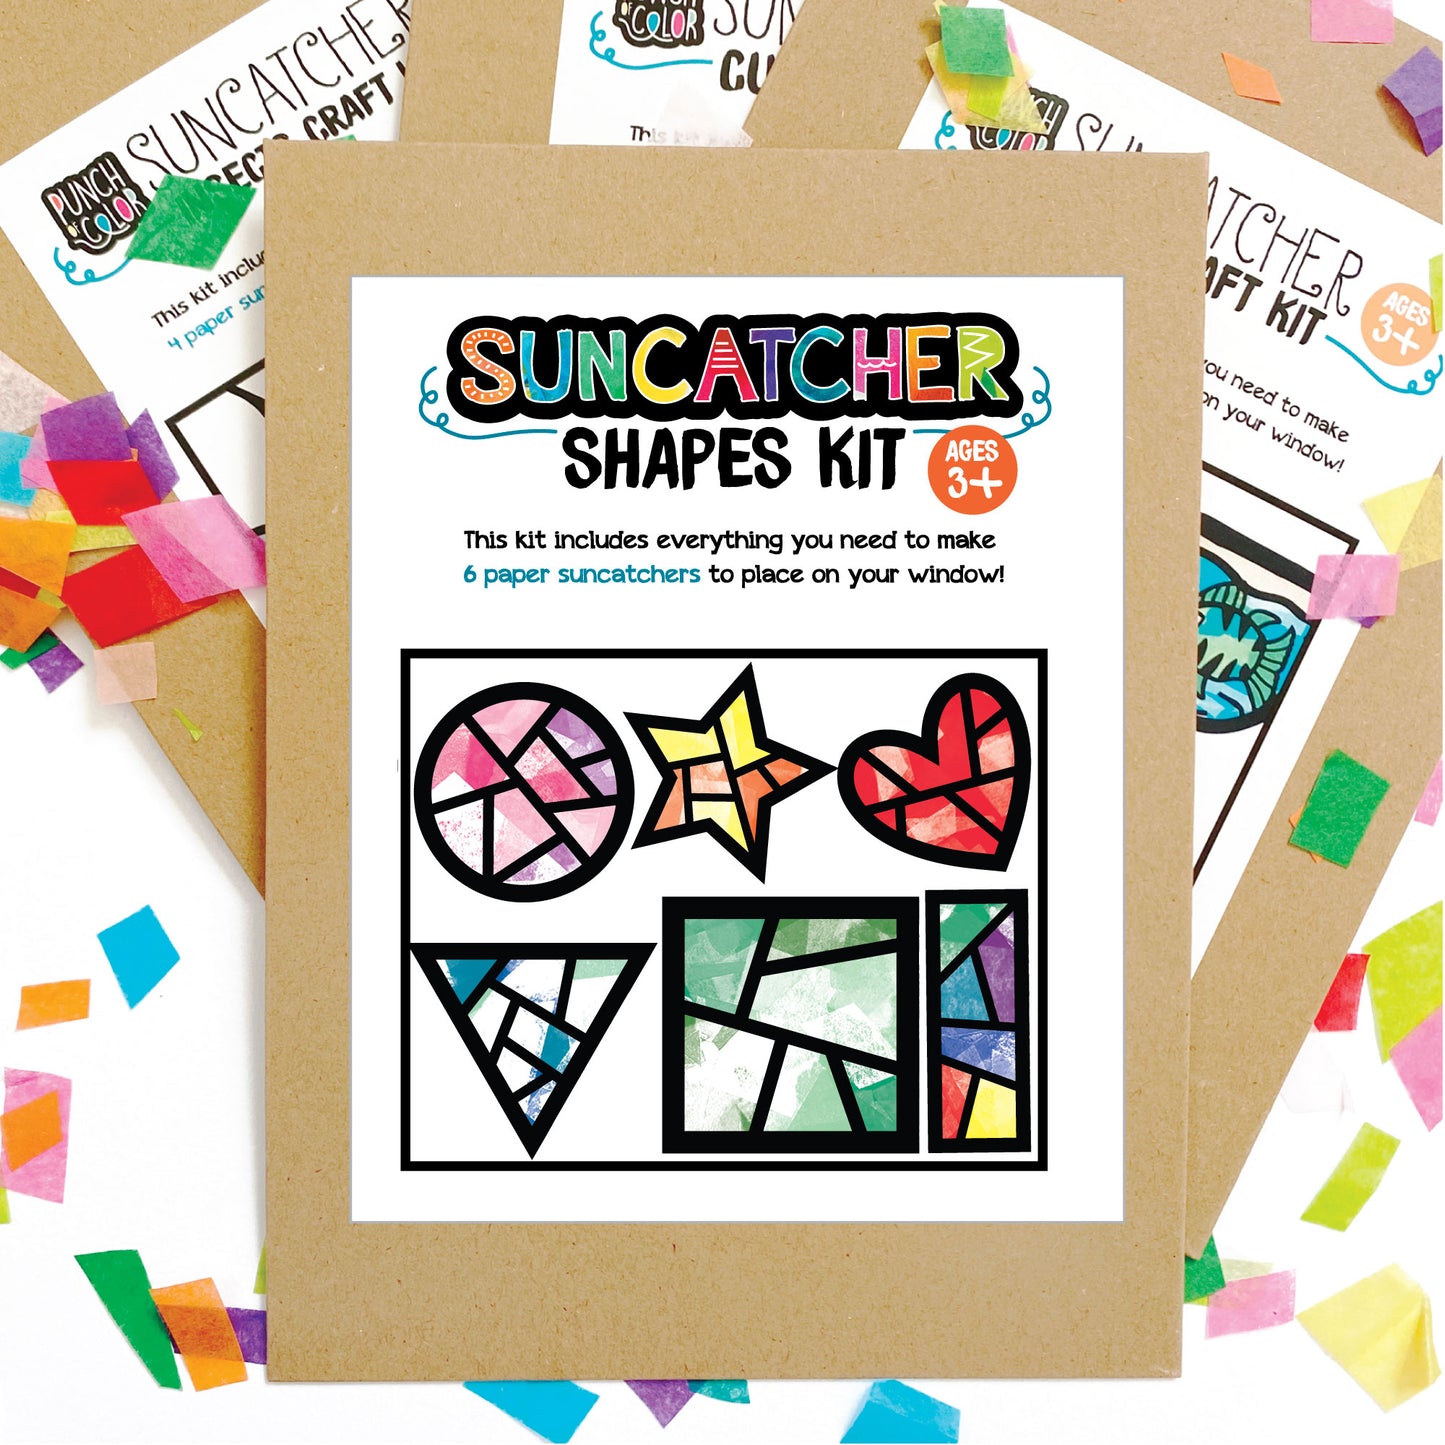 Learning shapes suncatcher arts and crafts kit, a mess-free paper based activity for toddlers and kids.